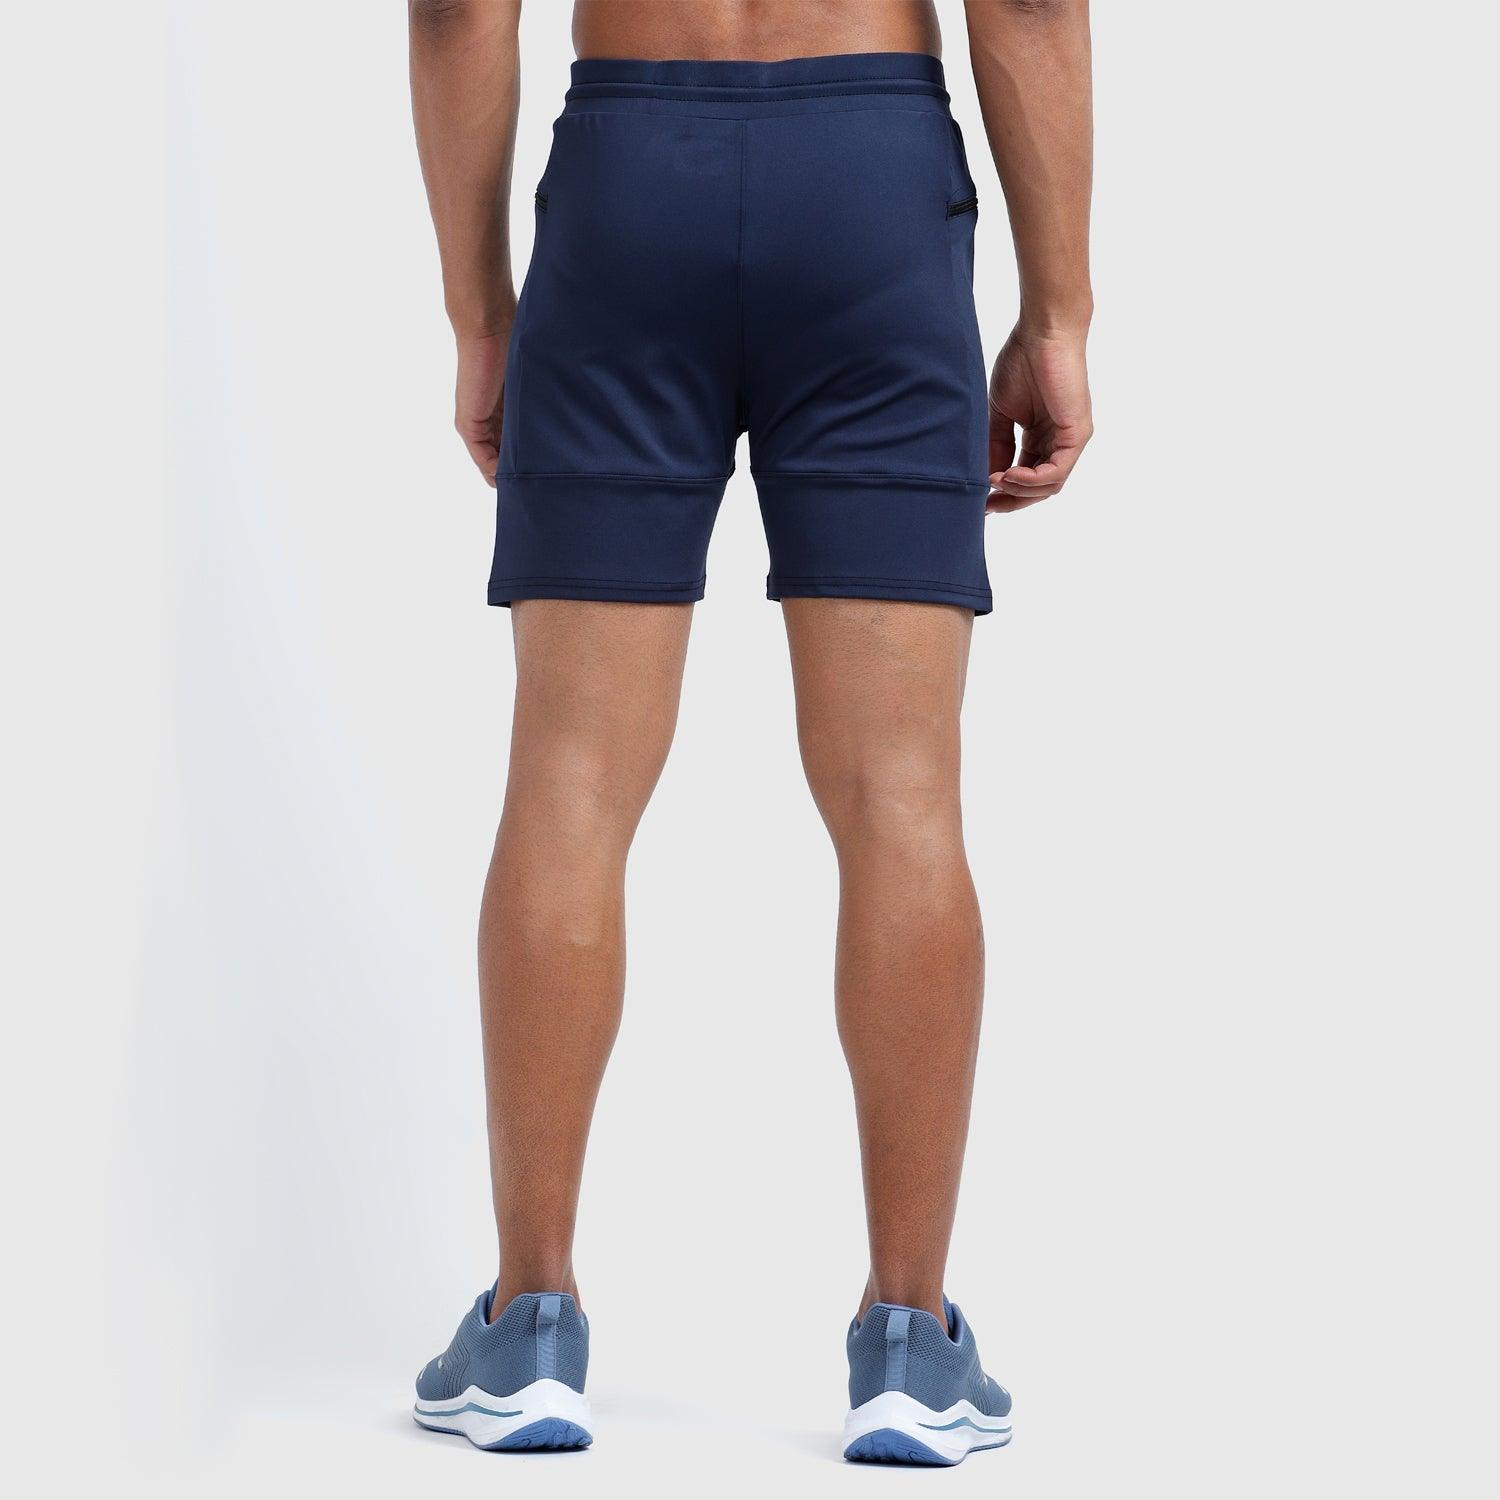 Denmonk's fashionable Power Shorts midnight navy shorts for men will boost your level of gym fitness.